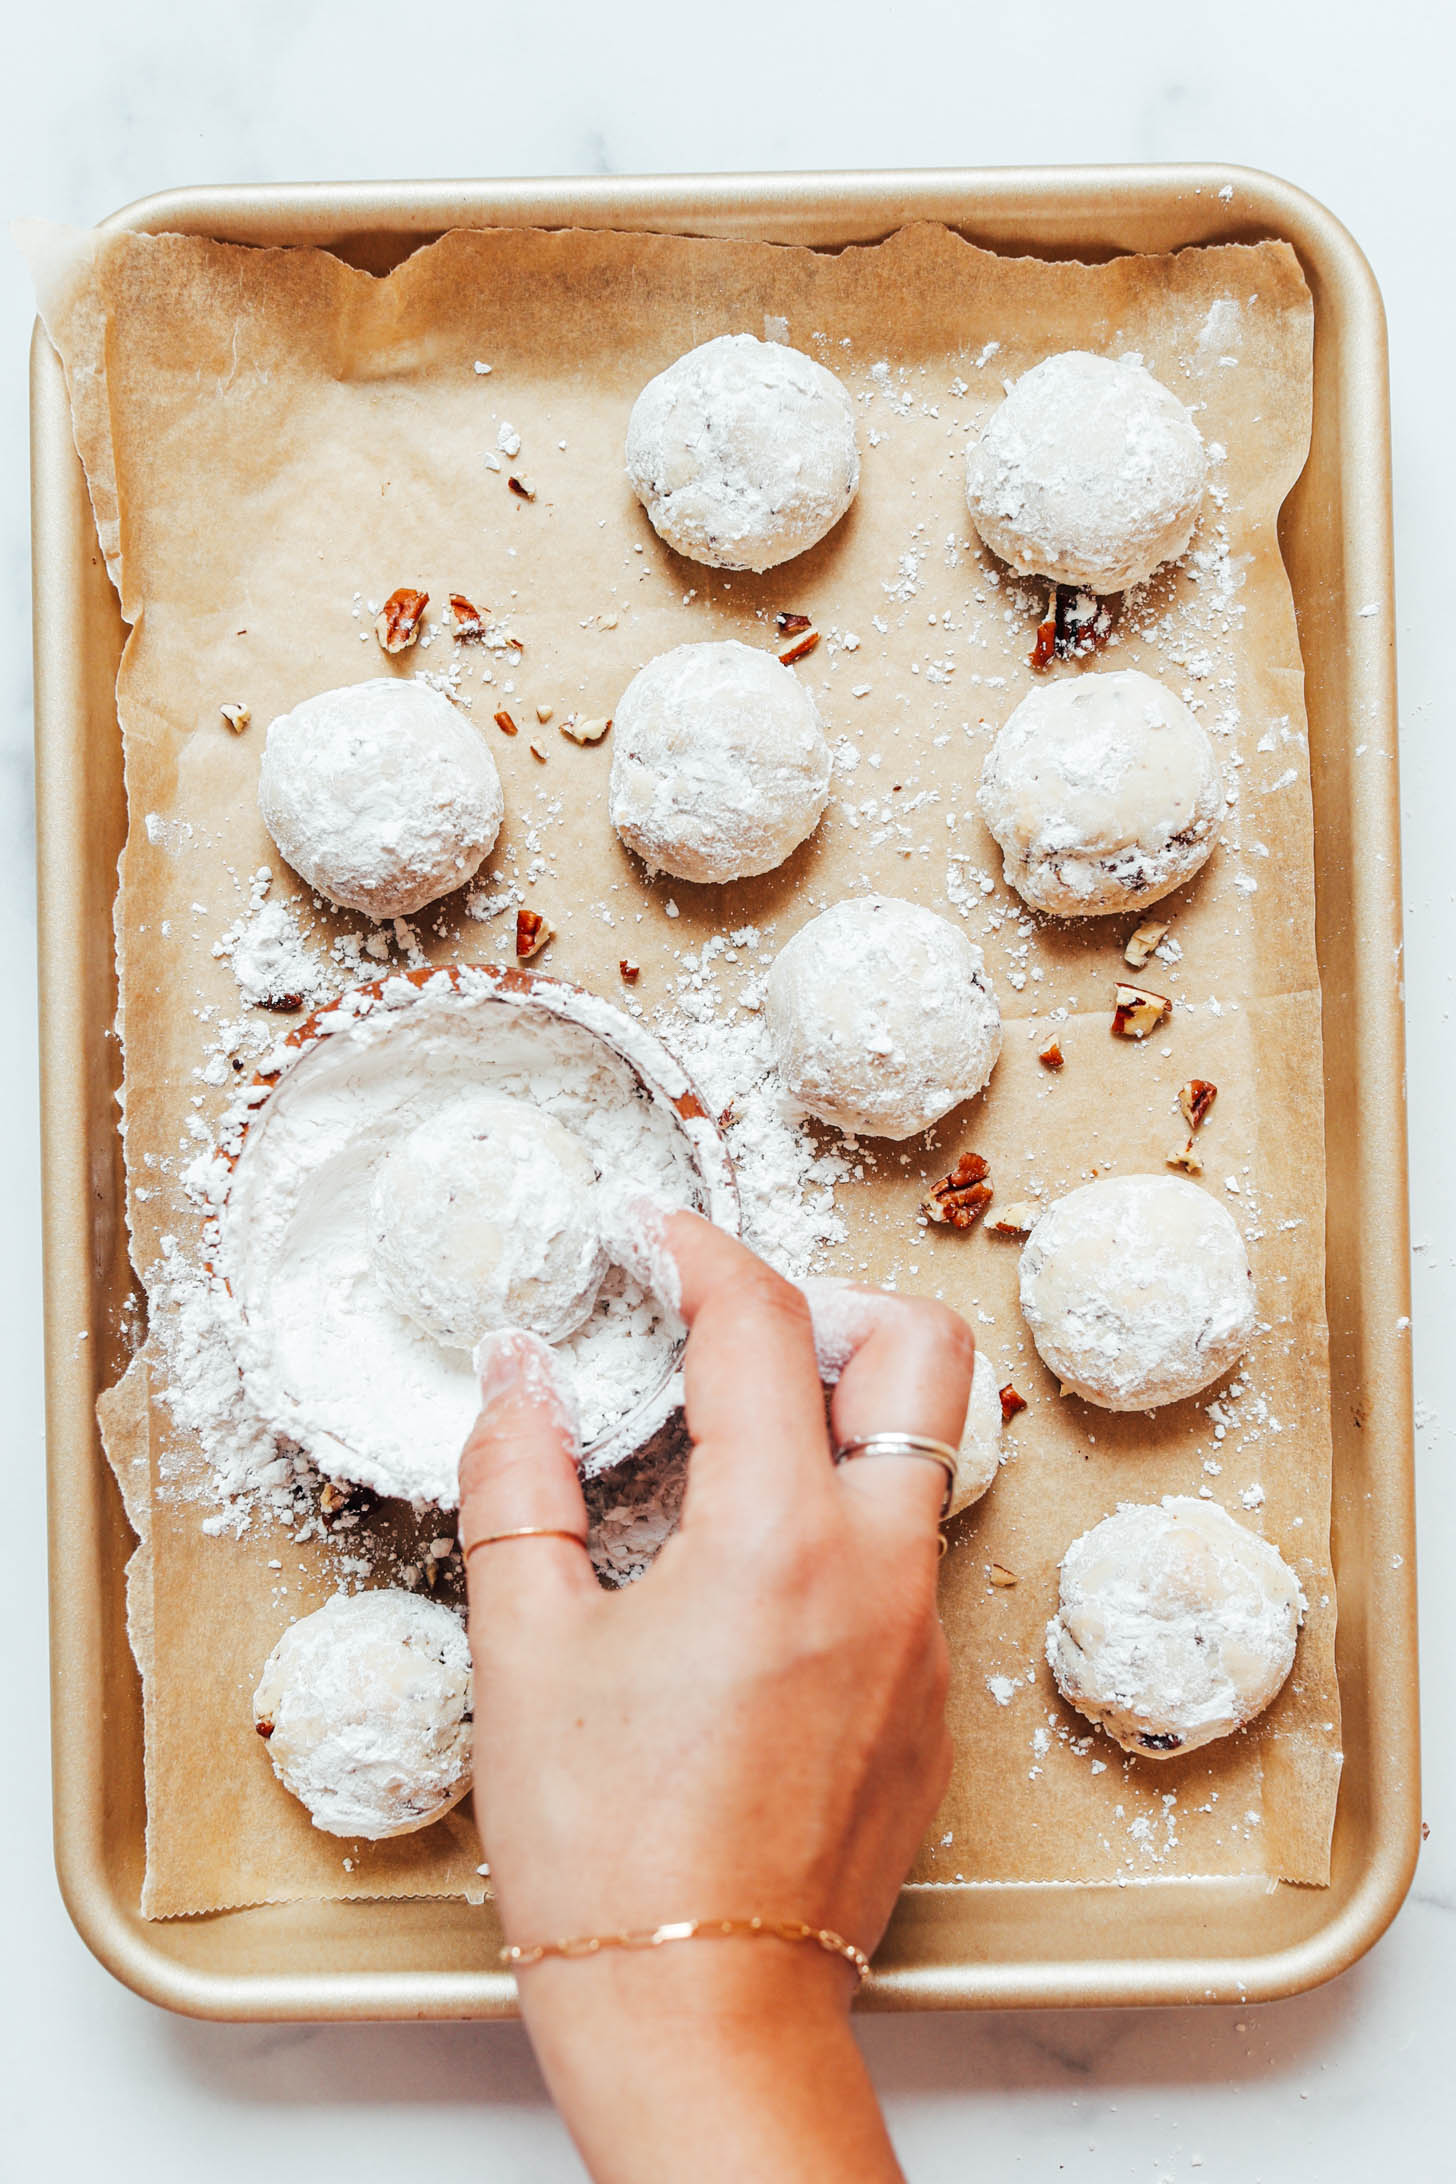 Dipping a freshly baked cookie into a bowl of powdered sugar to make it look like a snowball